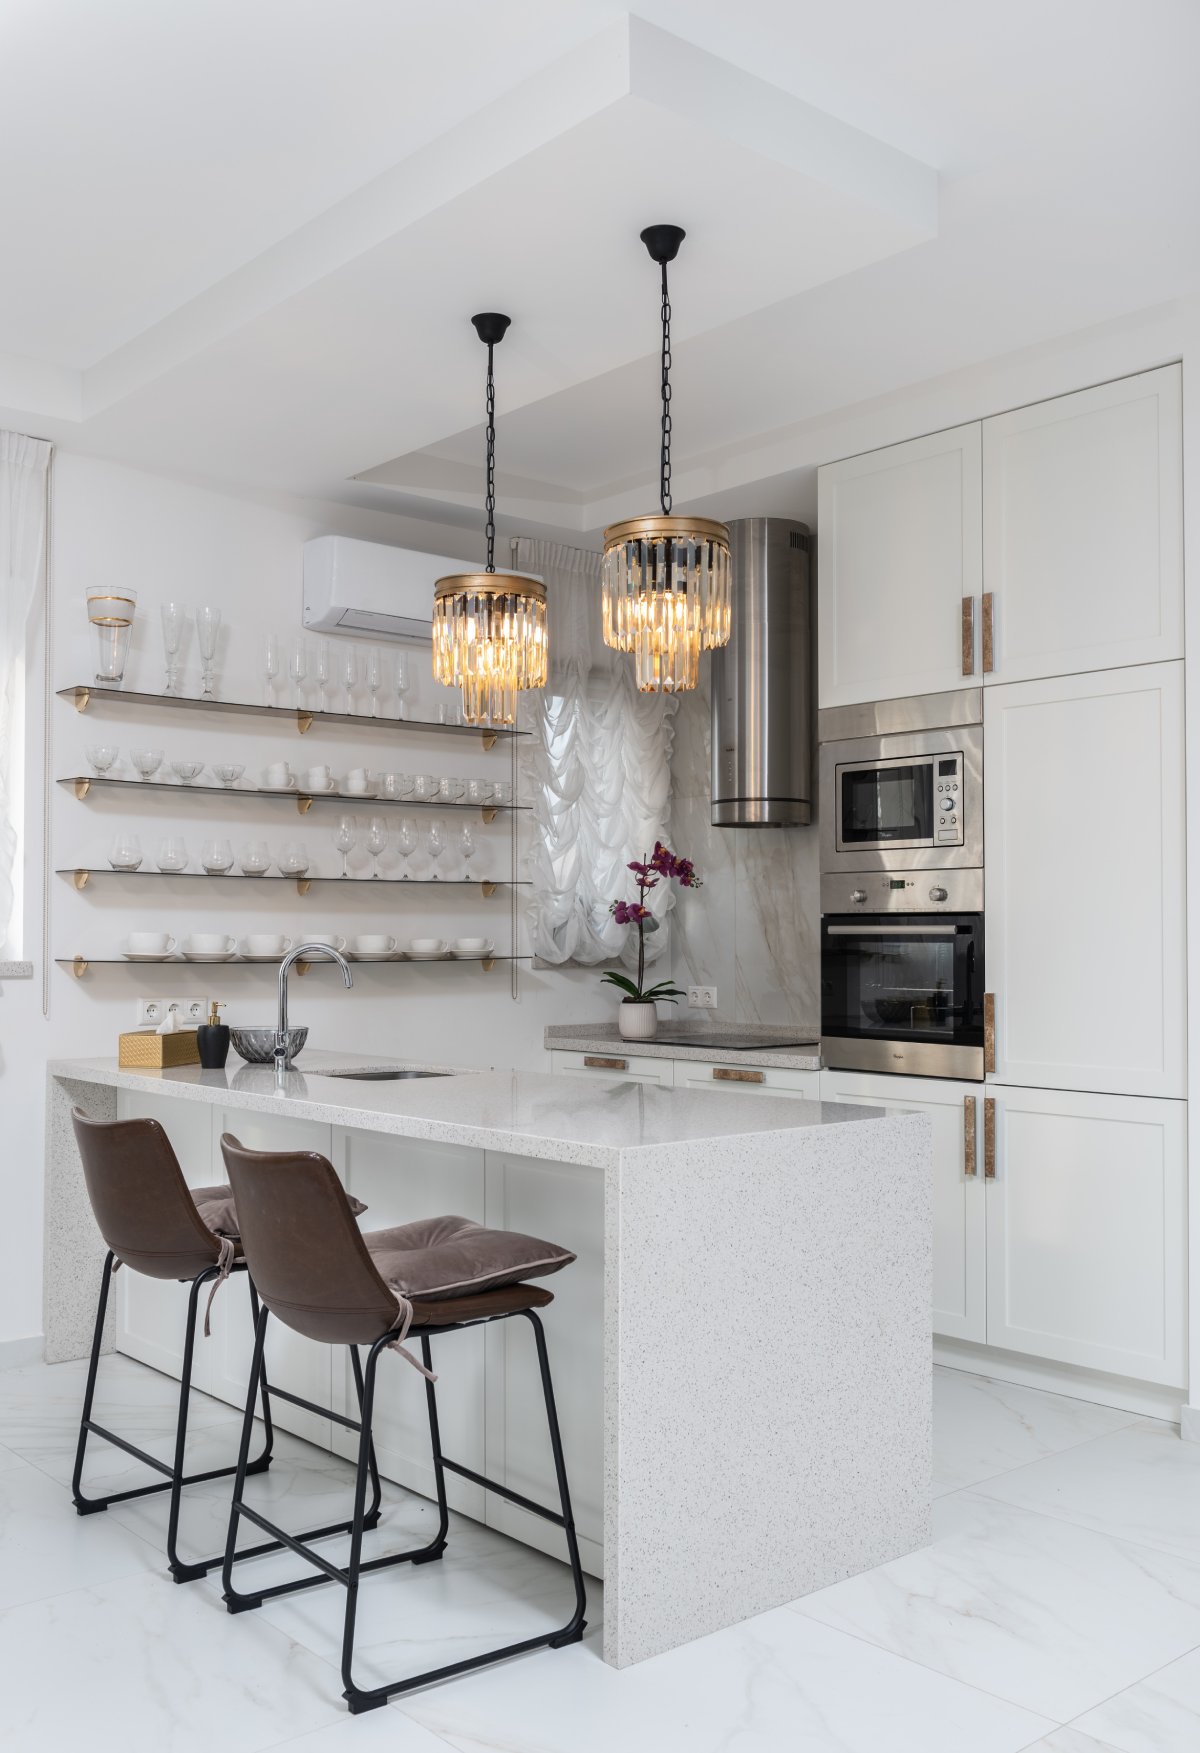 This home interior design company in Malaysia can help you remodel your kitchen in a creative way